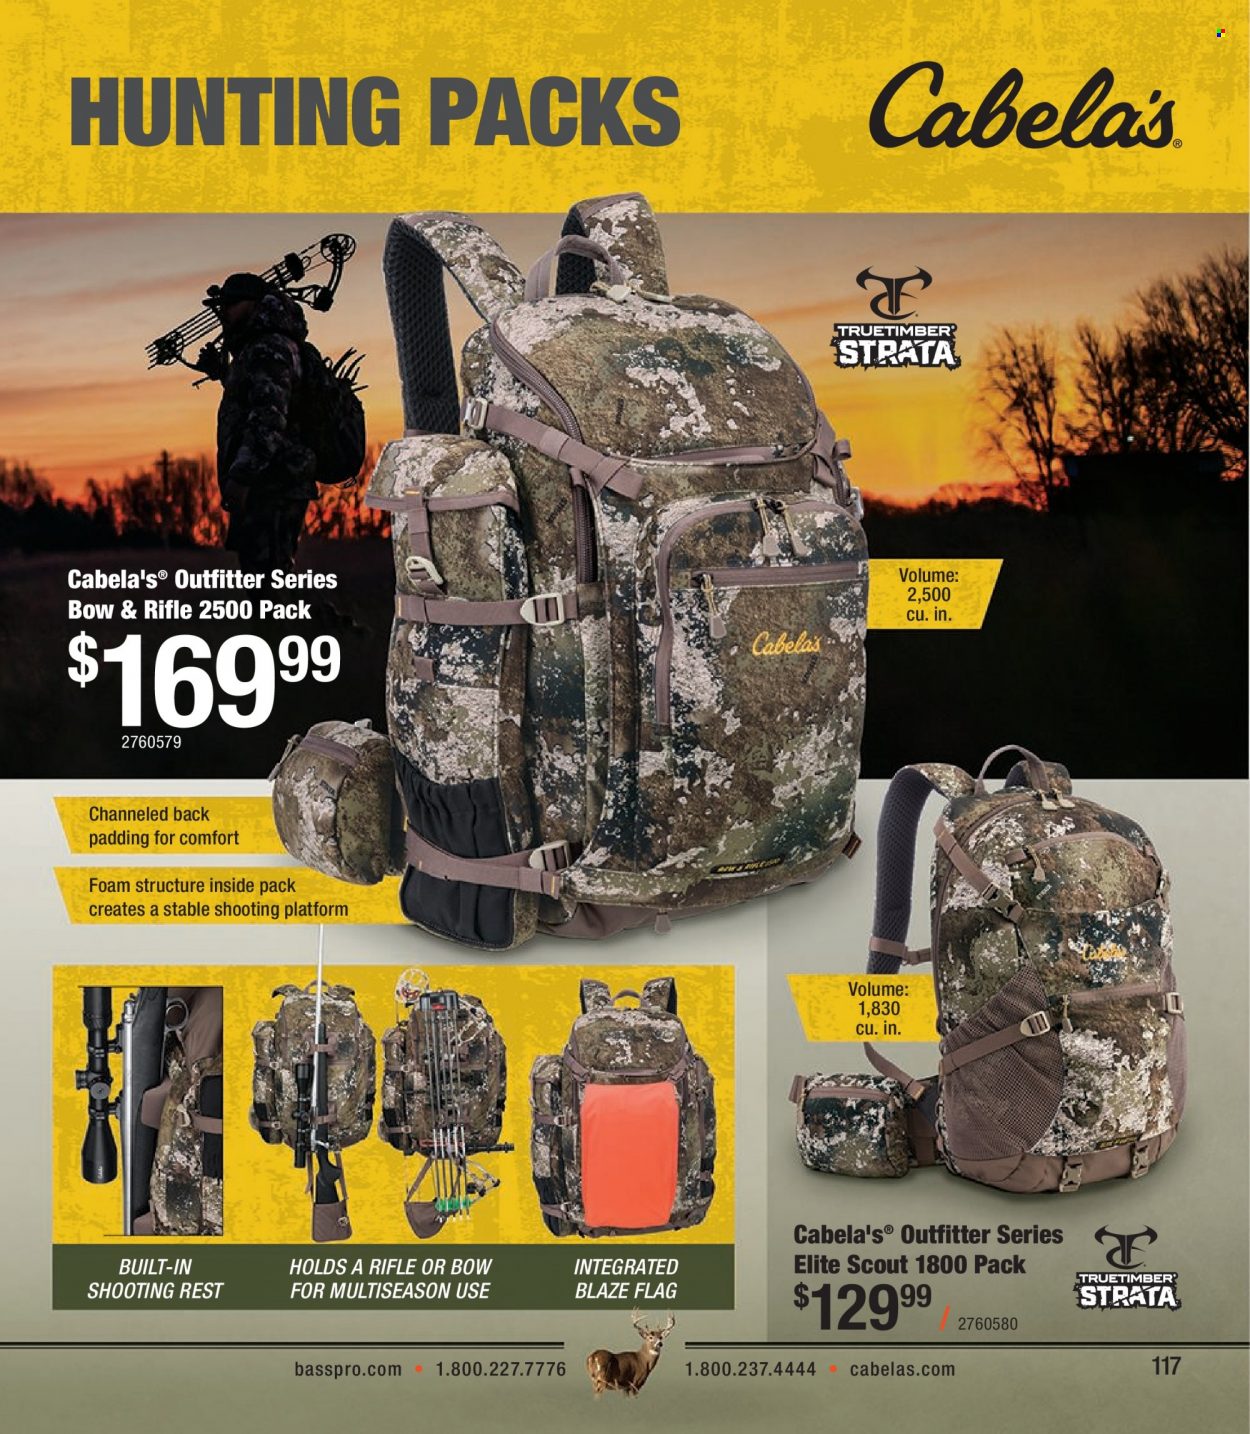 Bass Pro Shops flyer . Page 117.